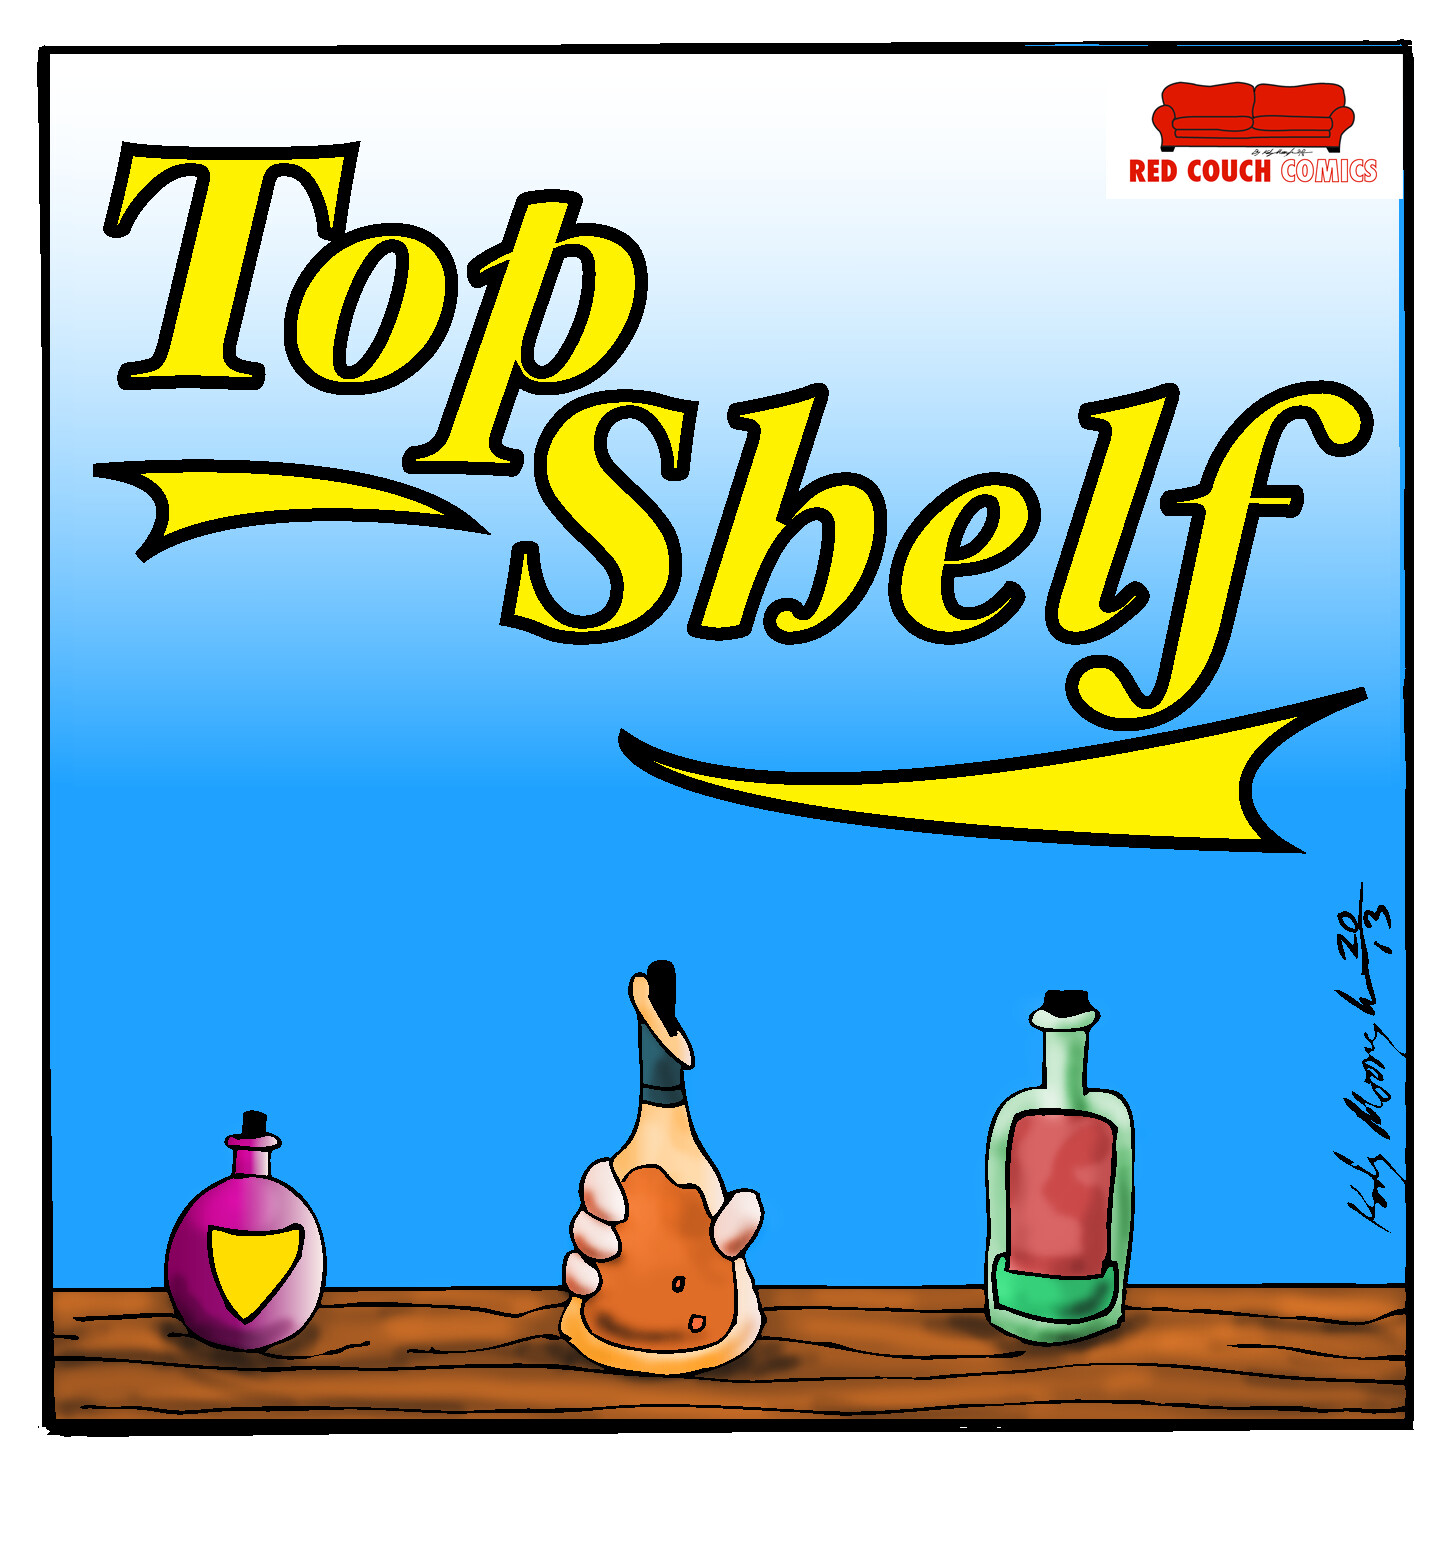 Top Shelf Logo - Red Couch Comics